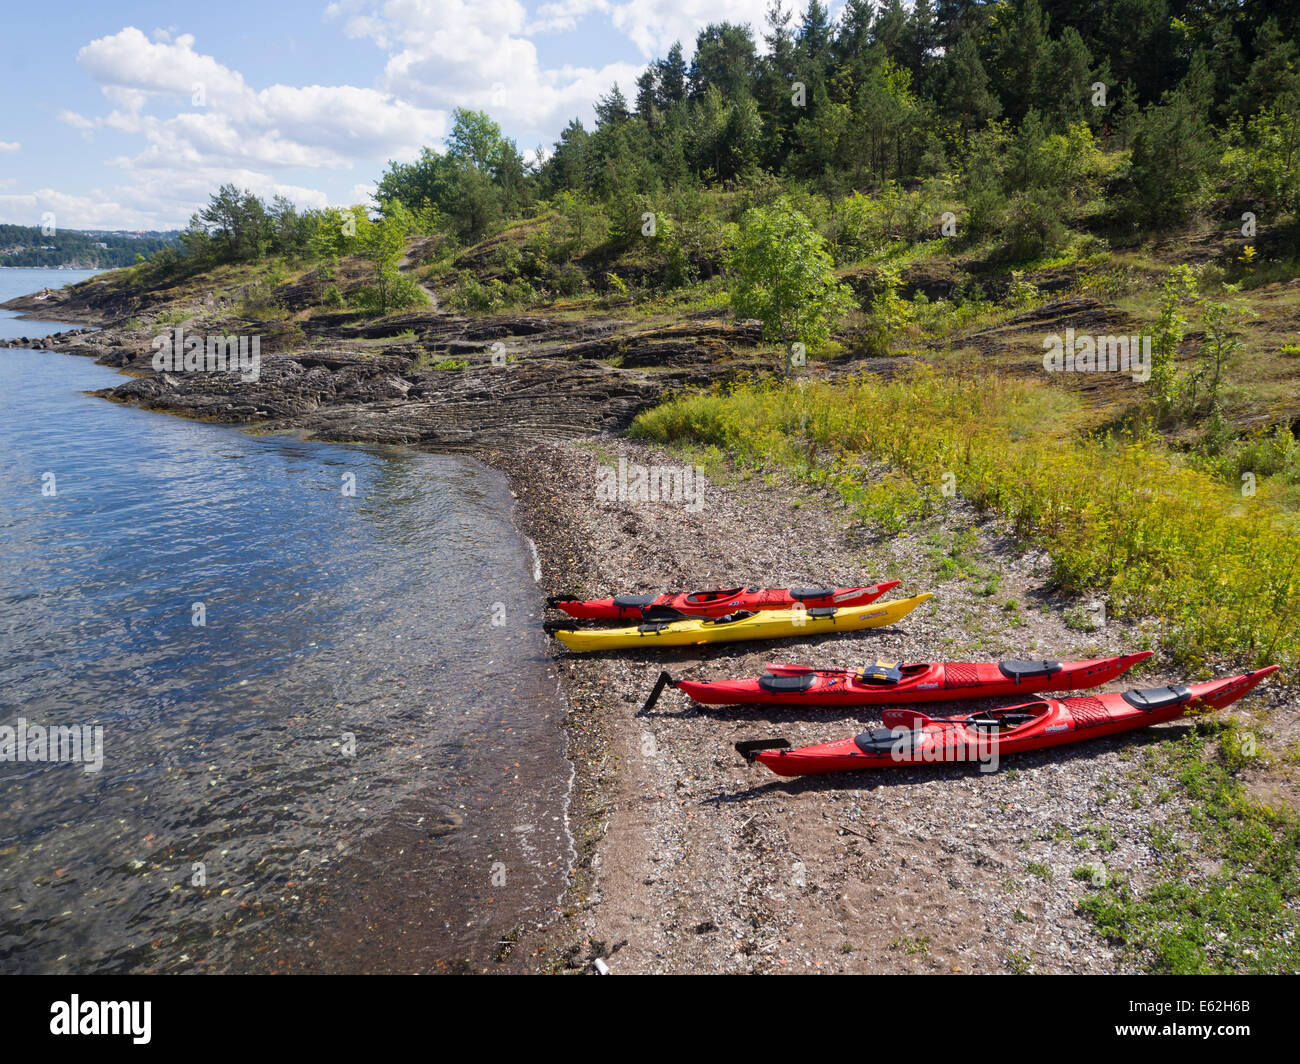 Summer in Oslo Norway, one activity is to rent sea kayaks, here they are  ready for a day from island to island on the Oslo fjord Stock Photo